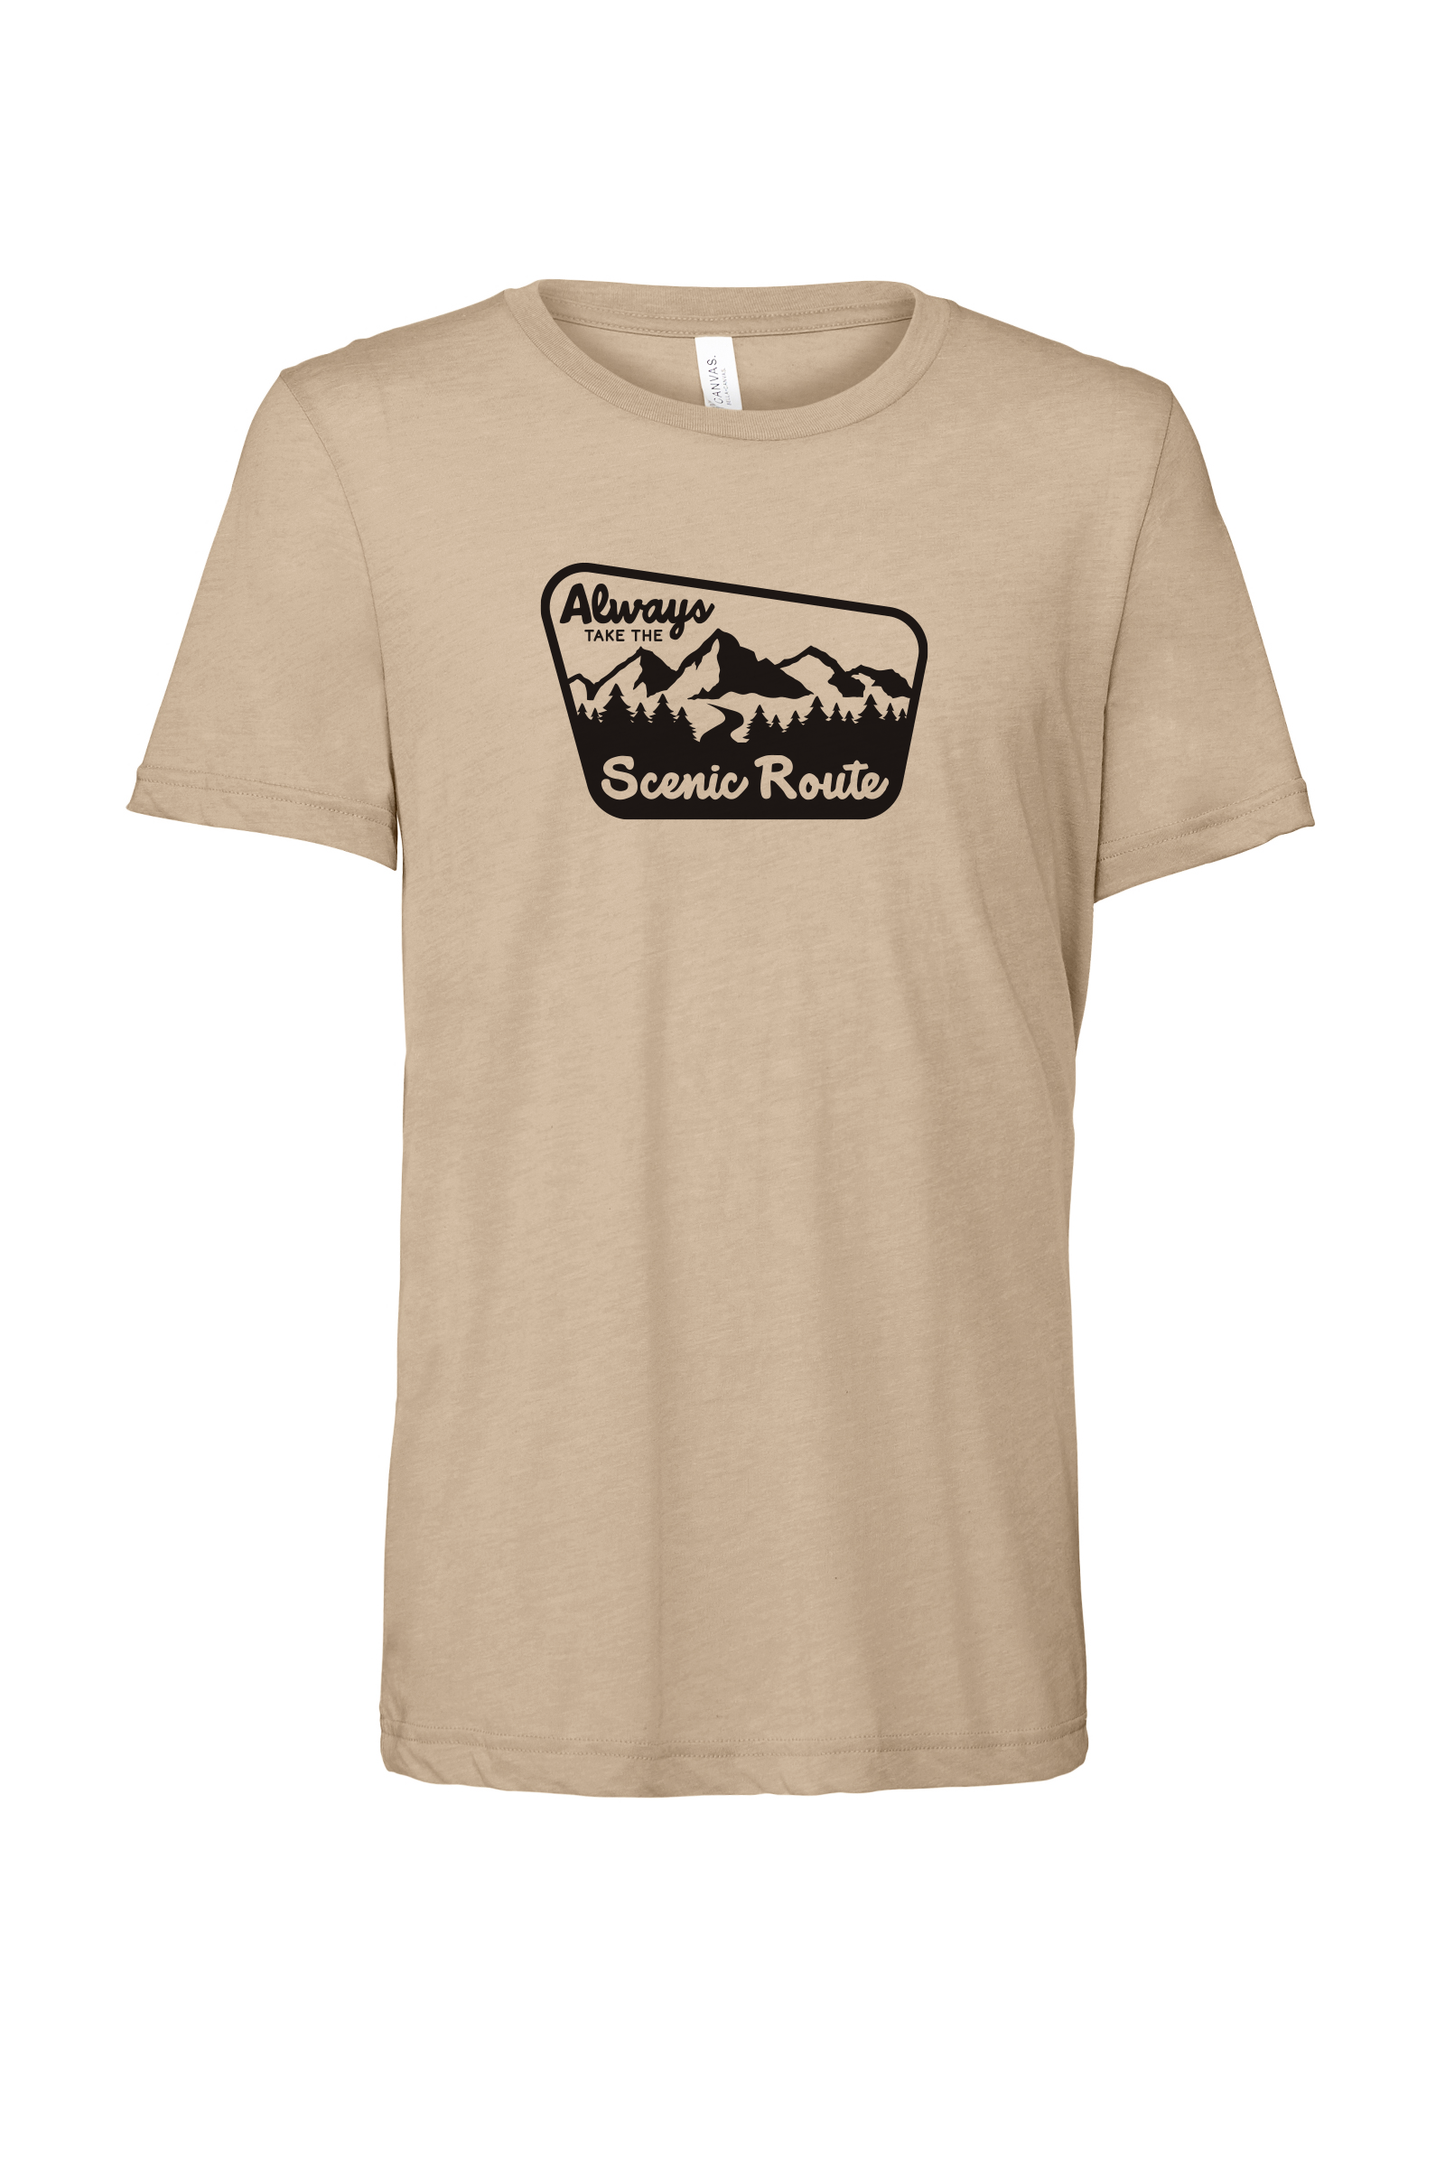 Always take the scenic route outdoors activity premium tee